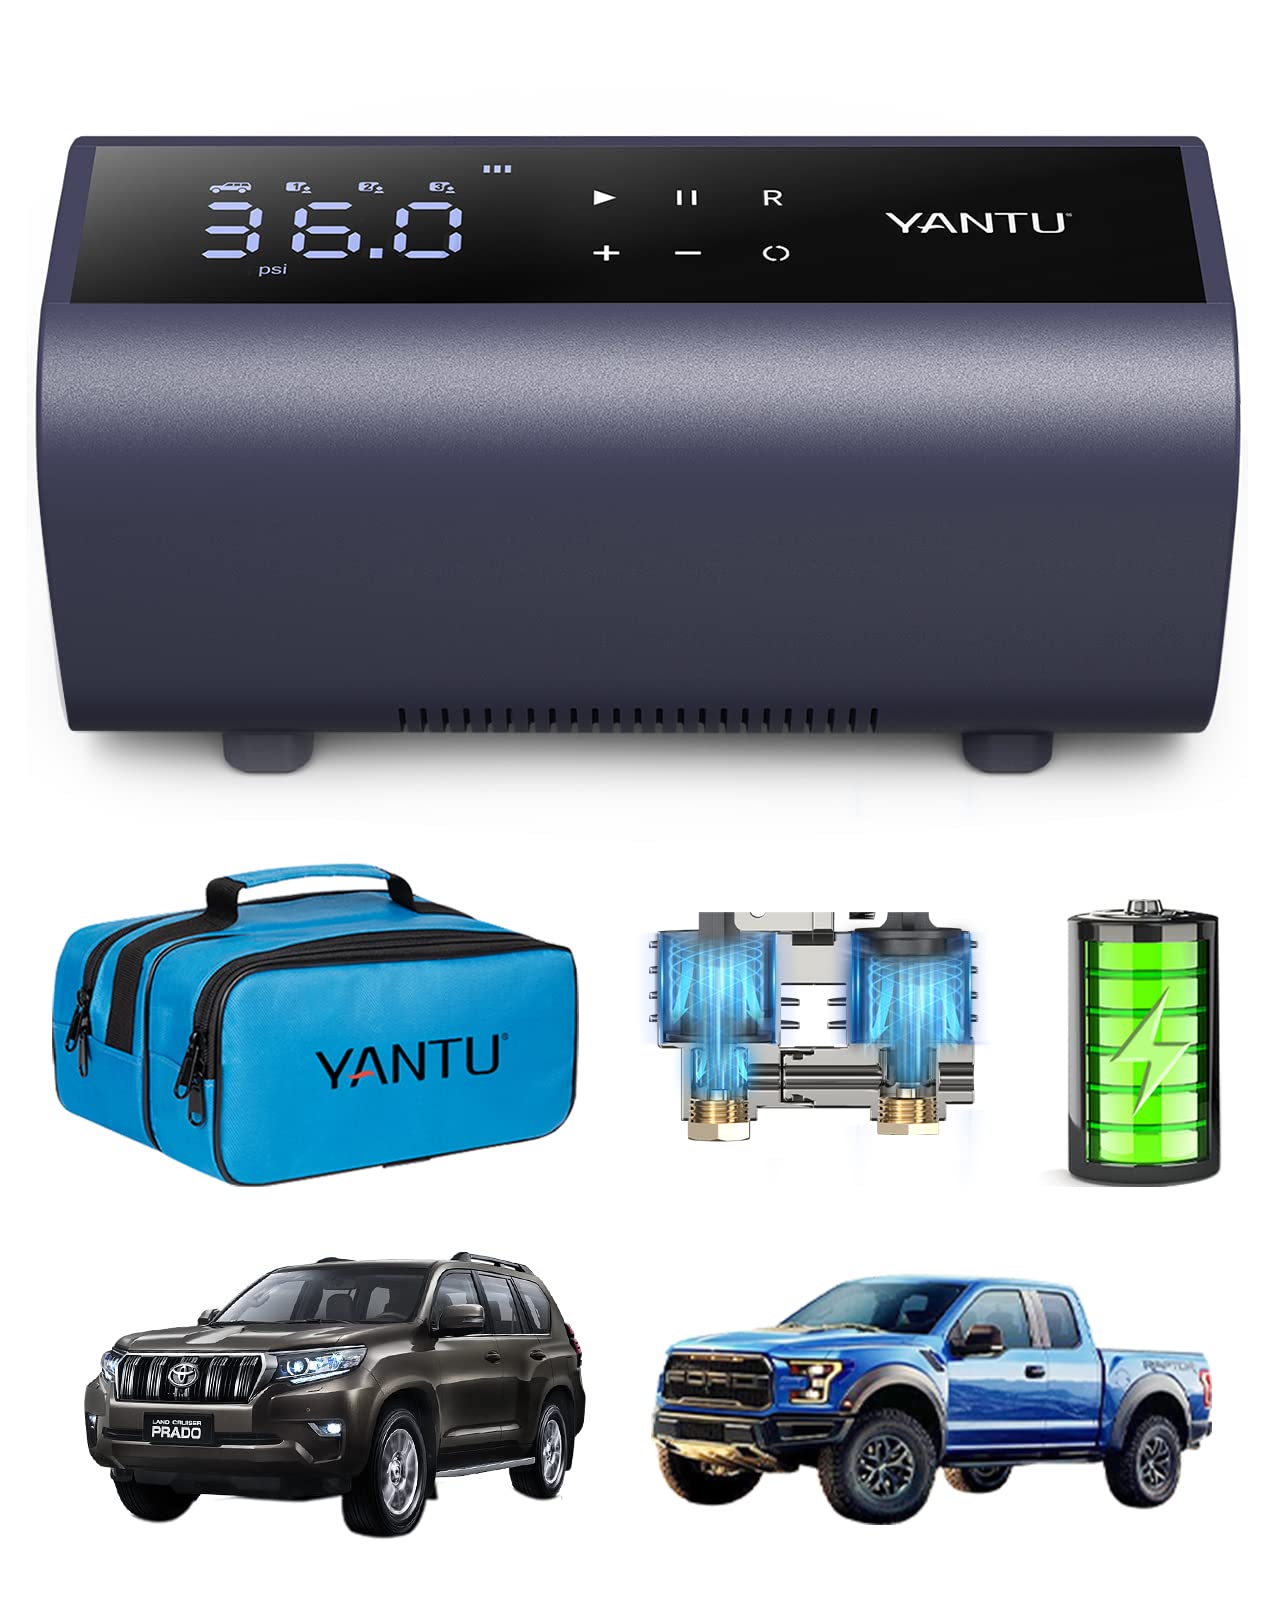 YANTU A22 Cordless Tire Inflator Portable Air Compressor,12V Tire Pump Battery Powered, Dual Cylinder 2X Inflation, Air Pump for